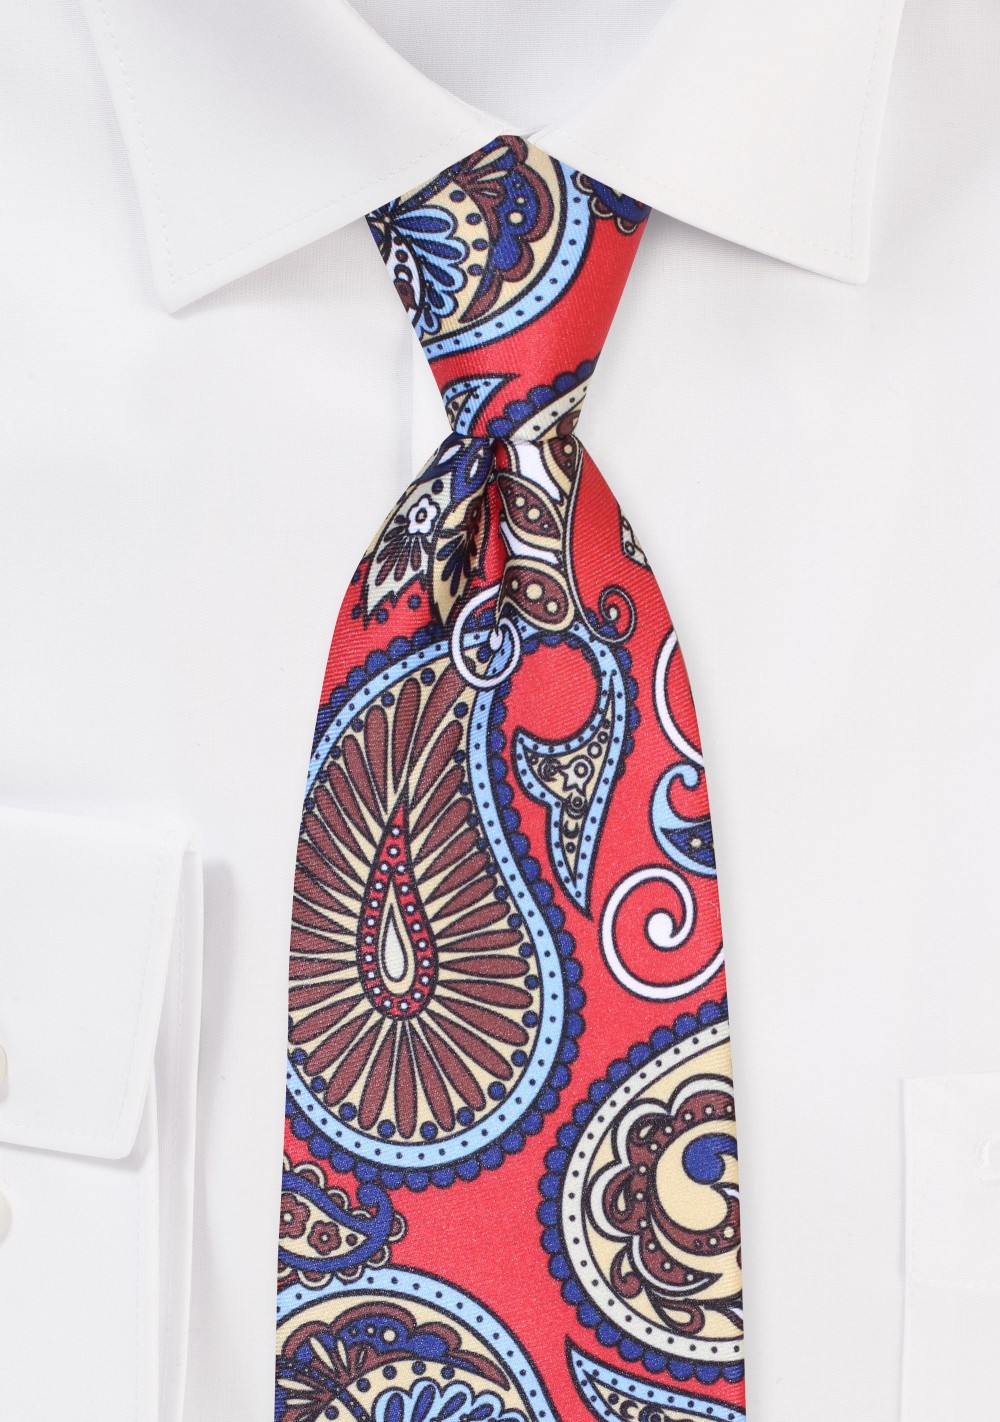 Crimson Red and Gold Paisley Tie